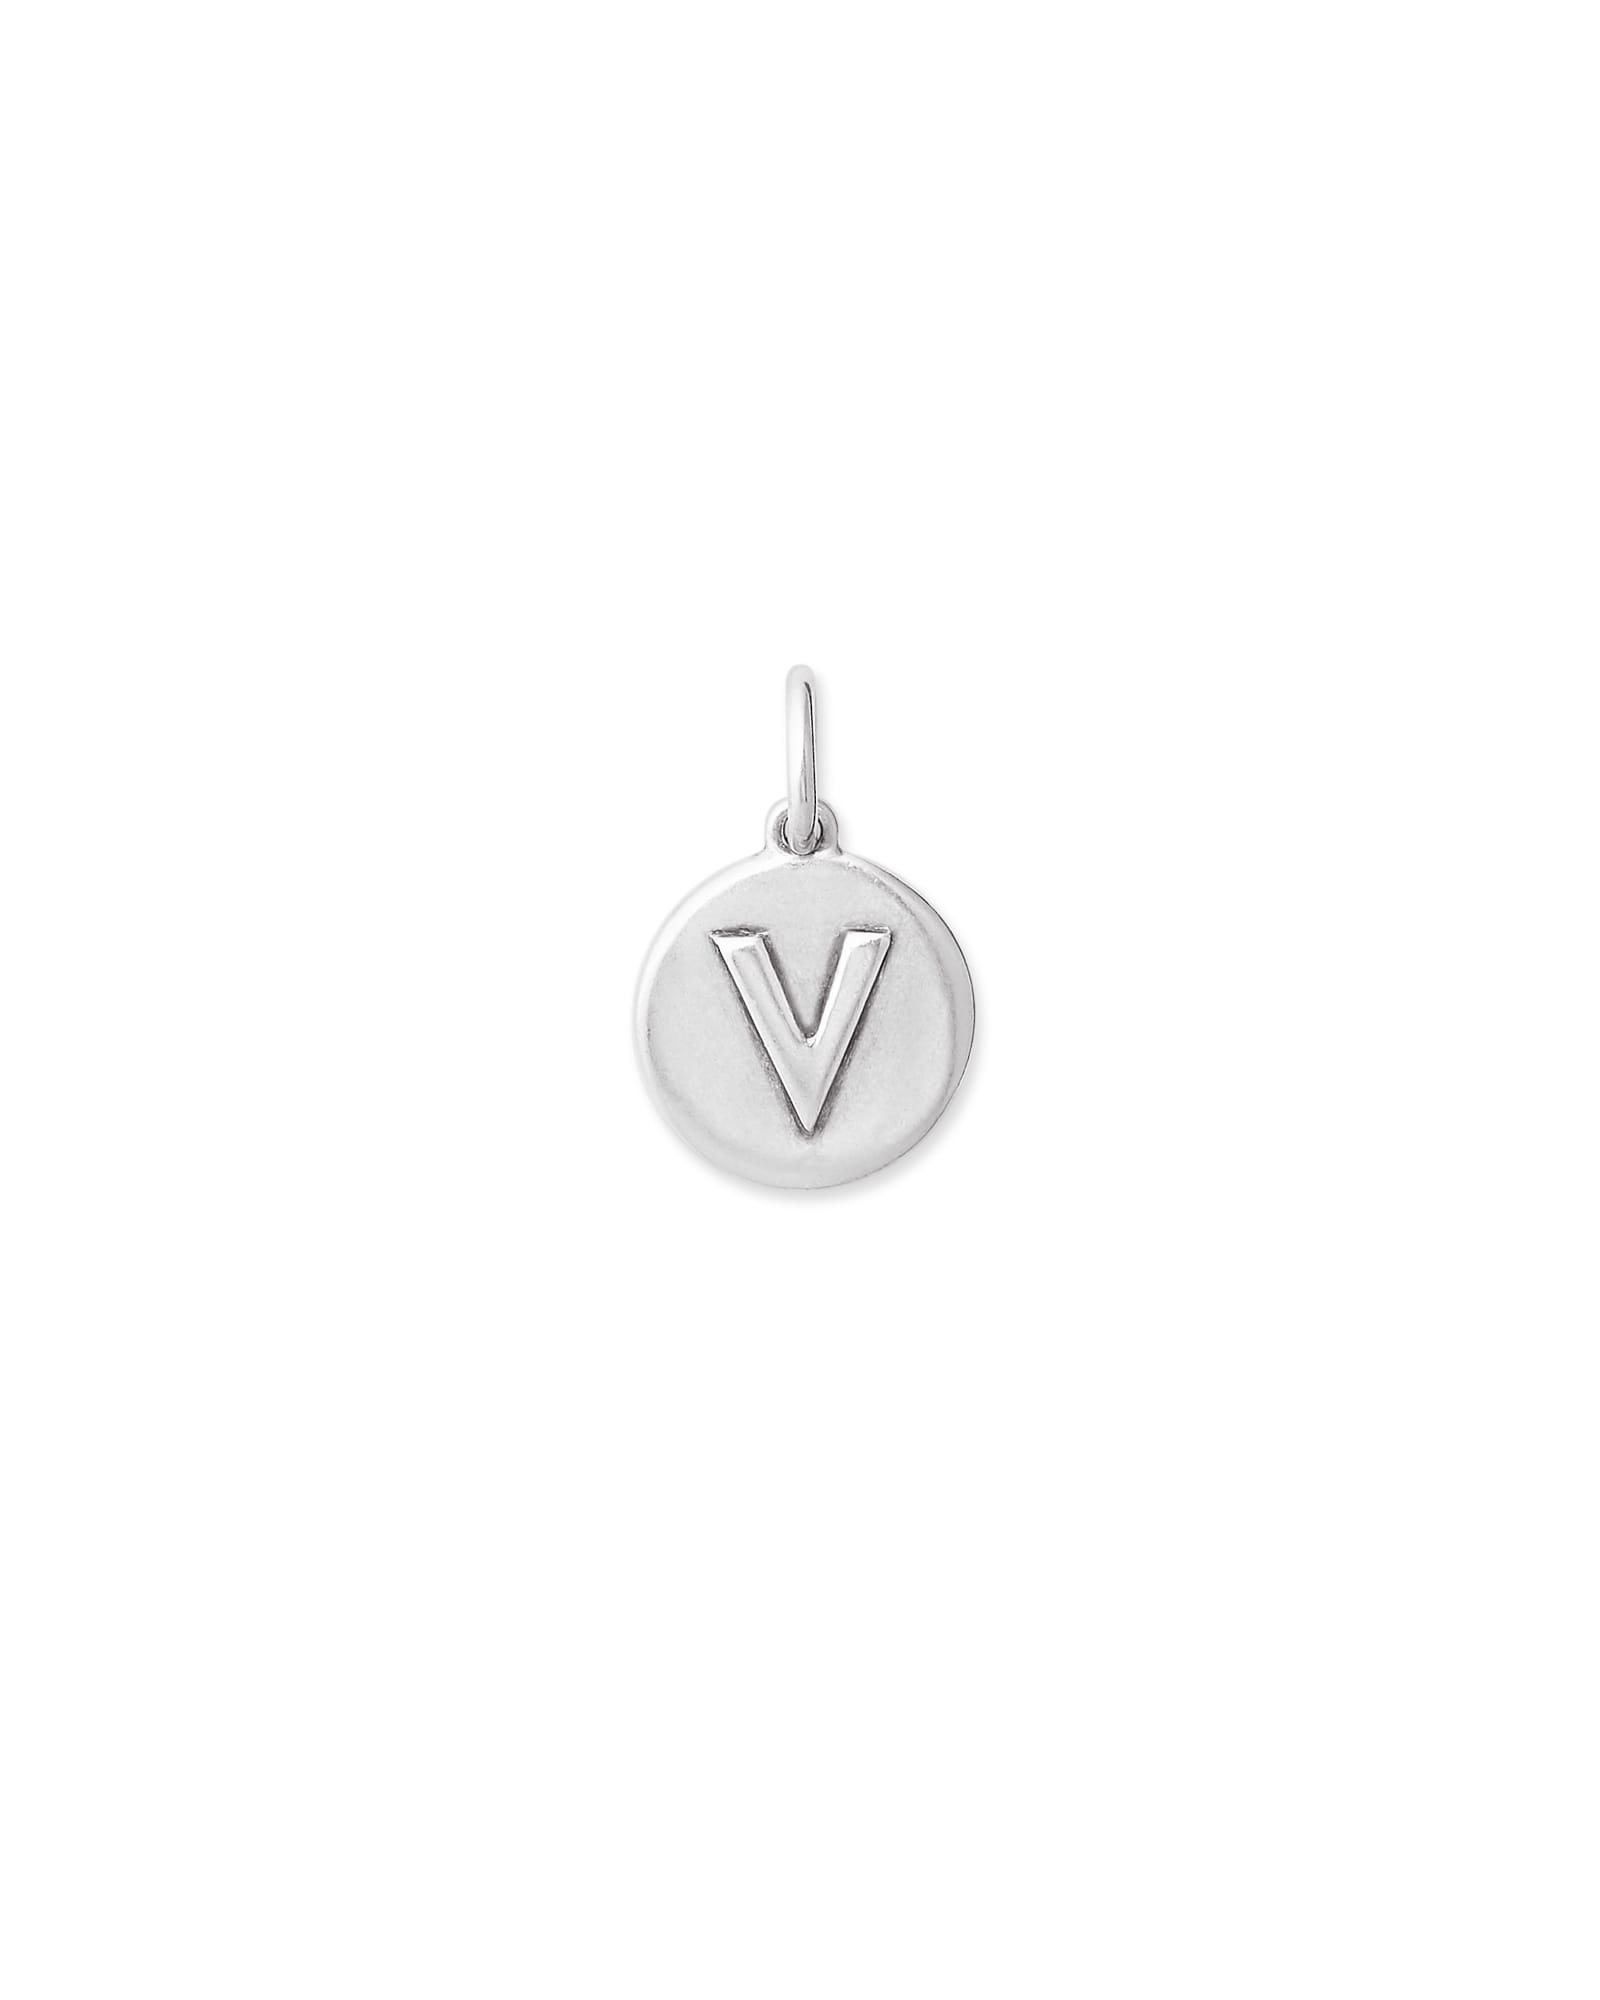 Kendra Scott Letter V Coin Charm in Oxidized Sterling Silver   Metal